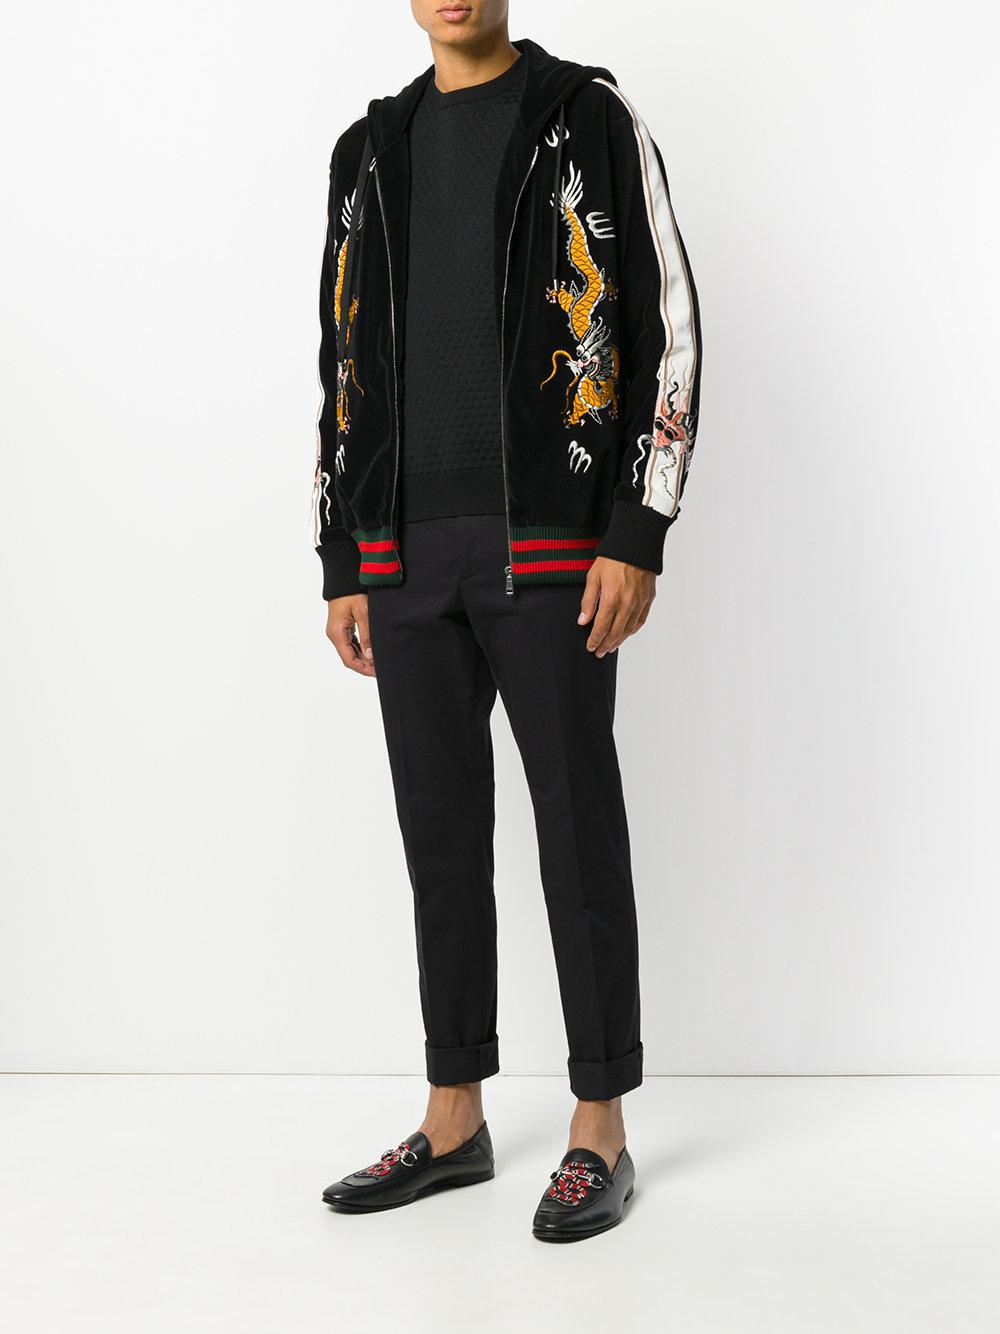 Gucci Cotton Dragon Embroidery Hooded Jacket in Black for Men - Lyst